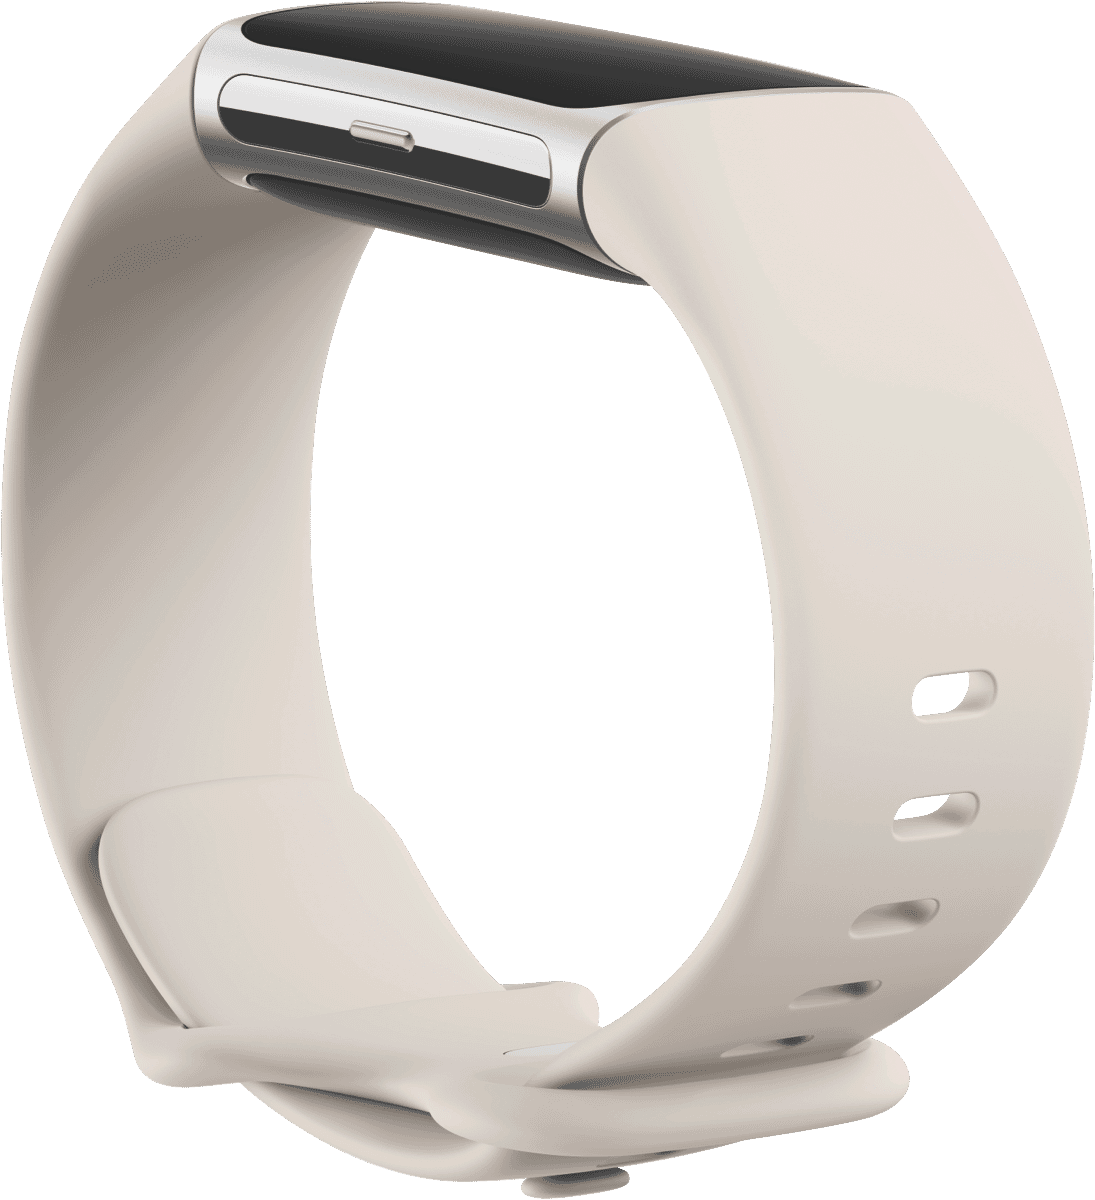 Buy the New Fitbit Charge 6 - Telstra